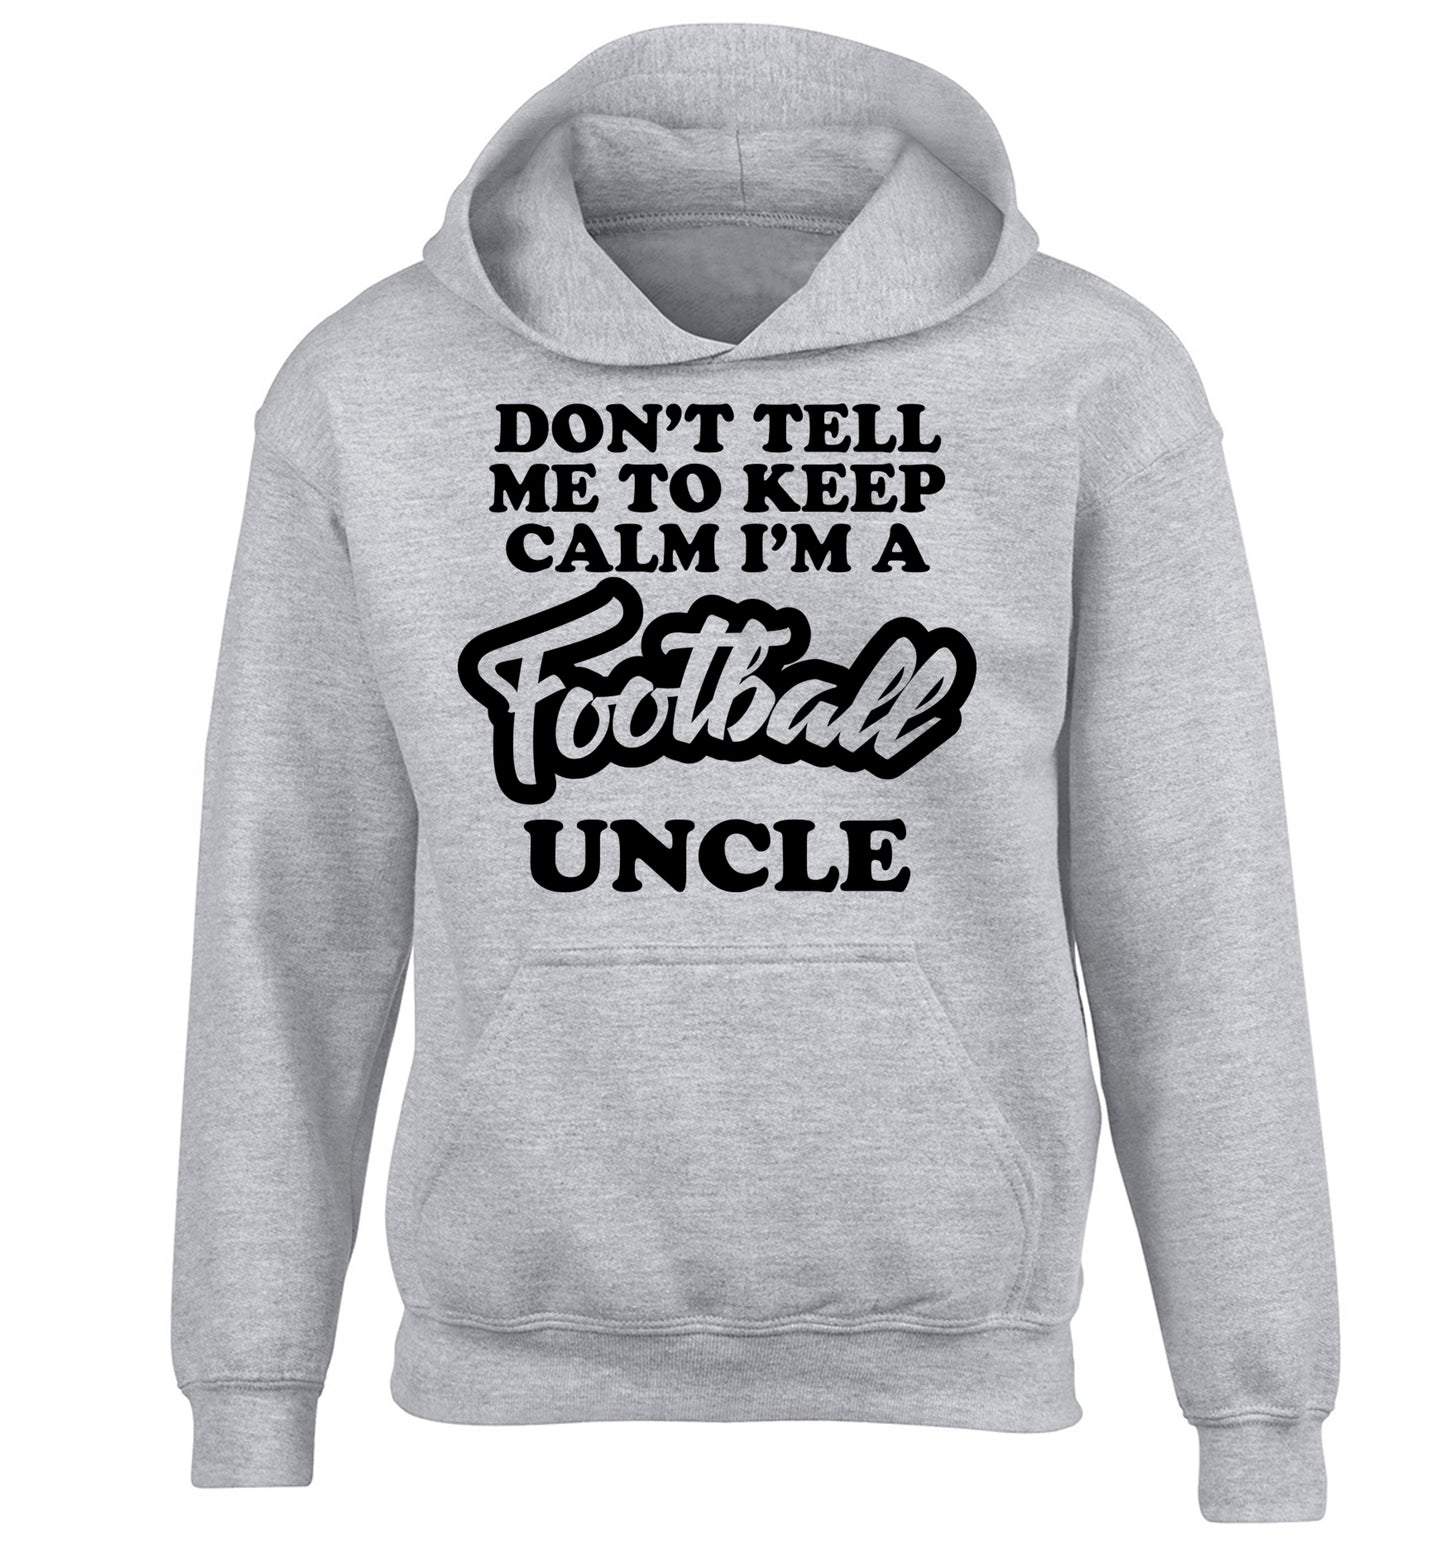 Don't tell me to keep calm I'm a football uncle children's grey hoodie 12-14 Years